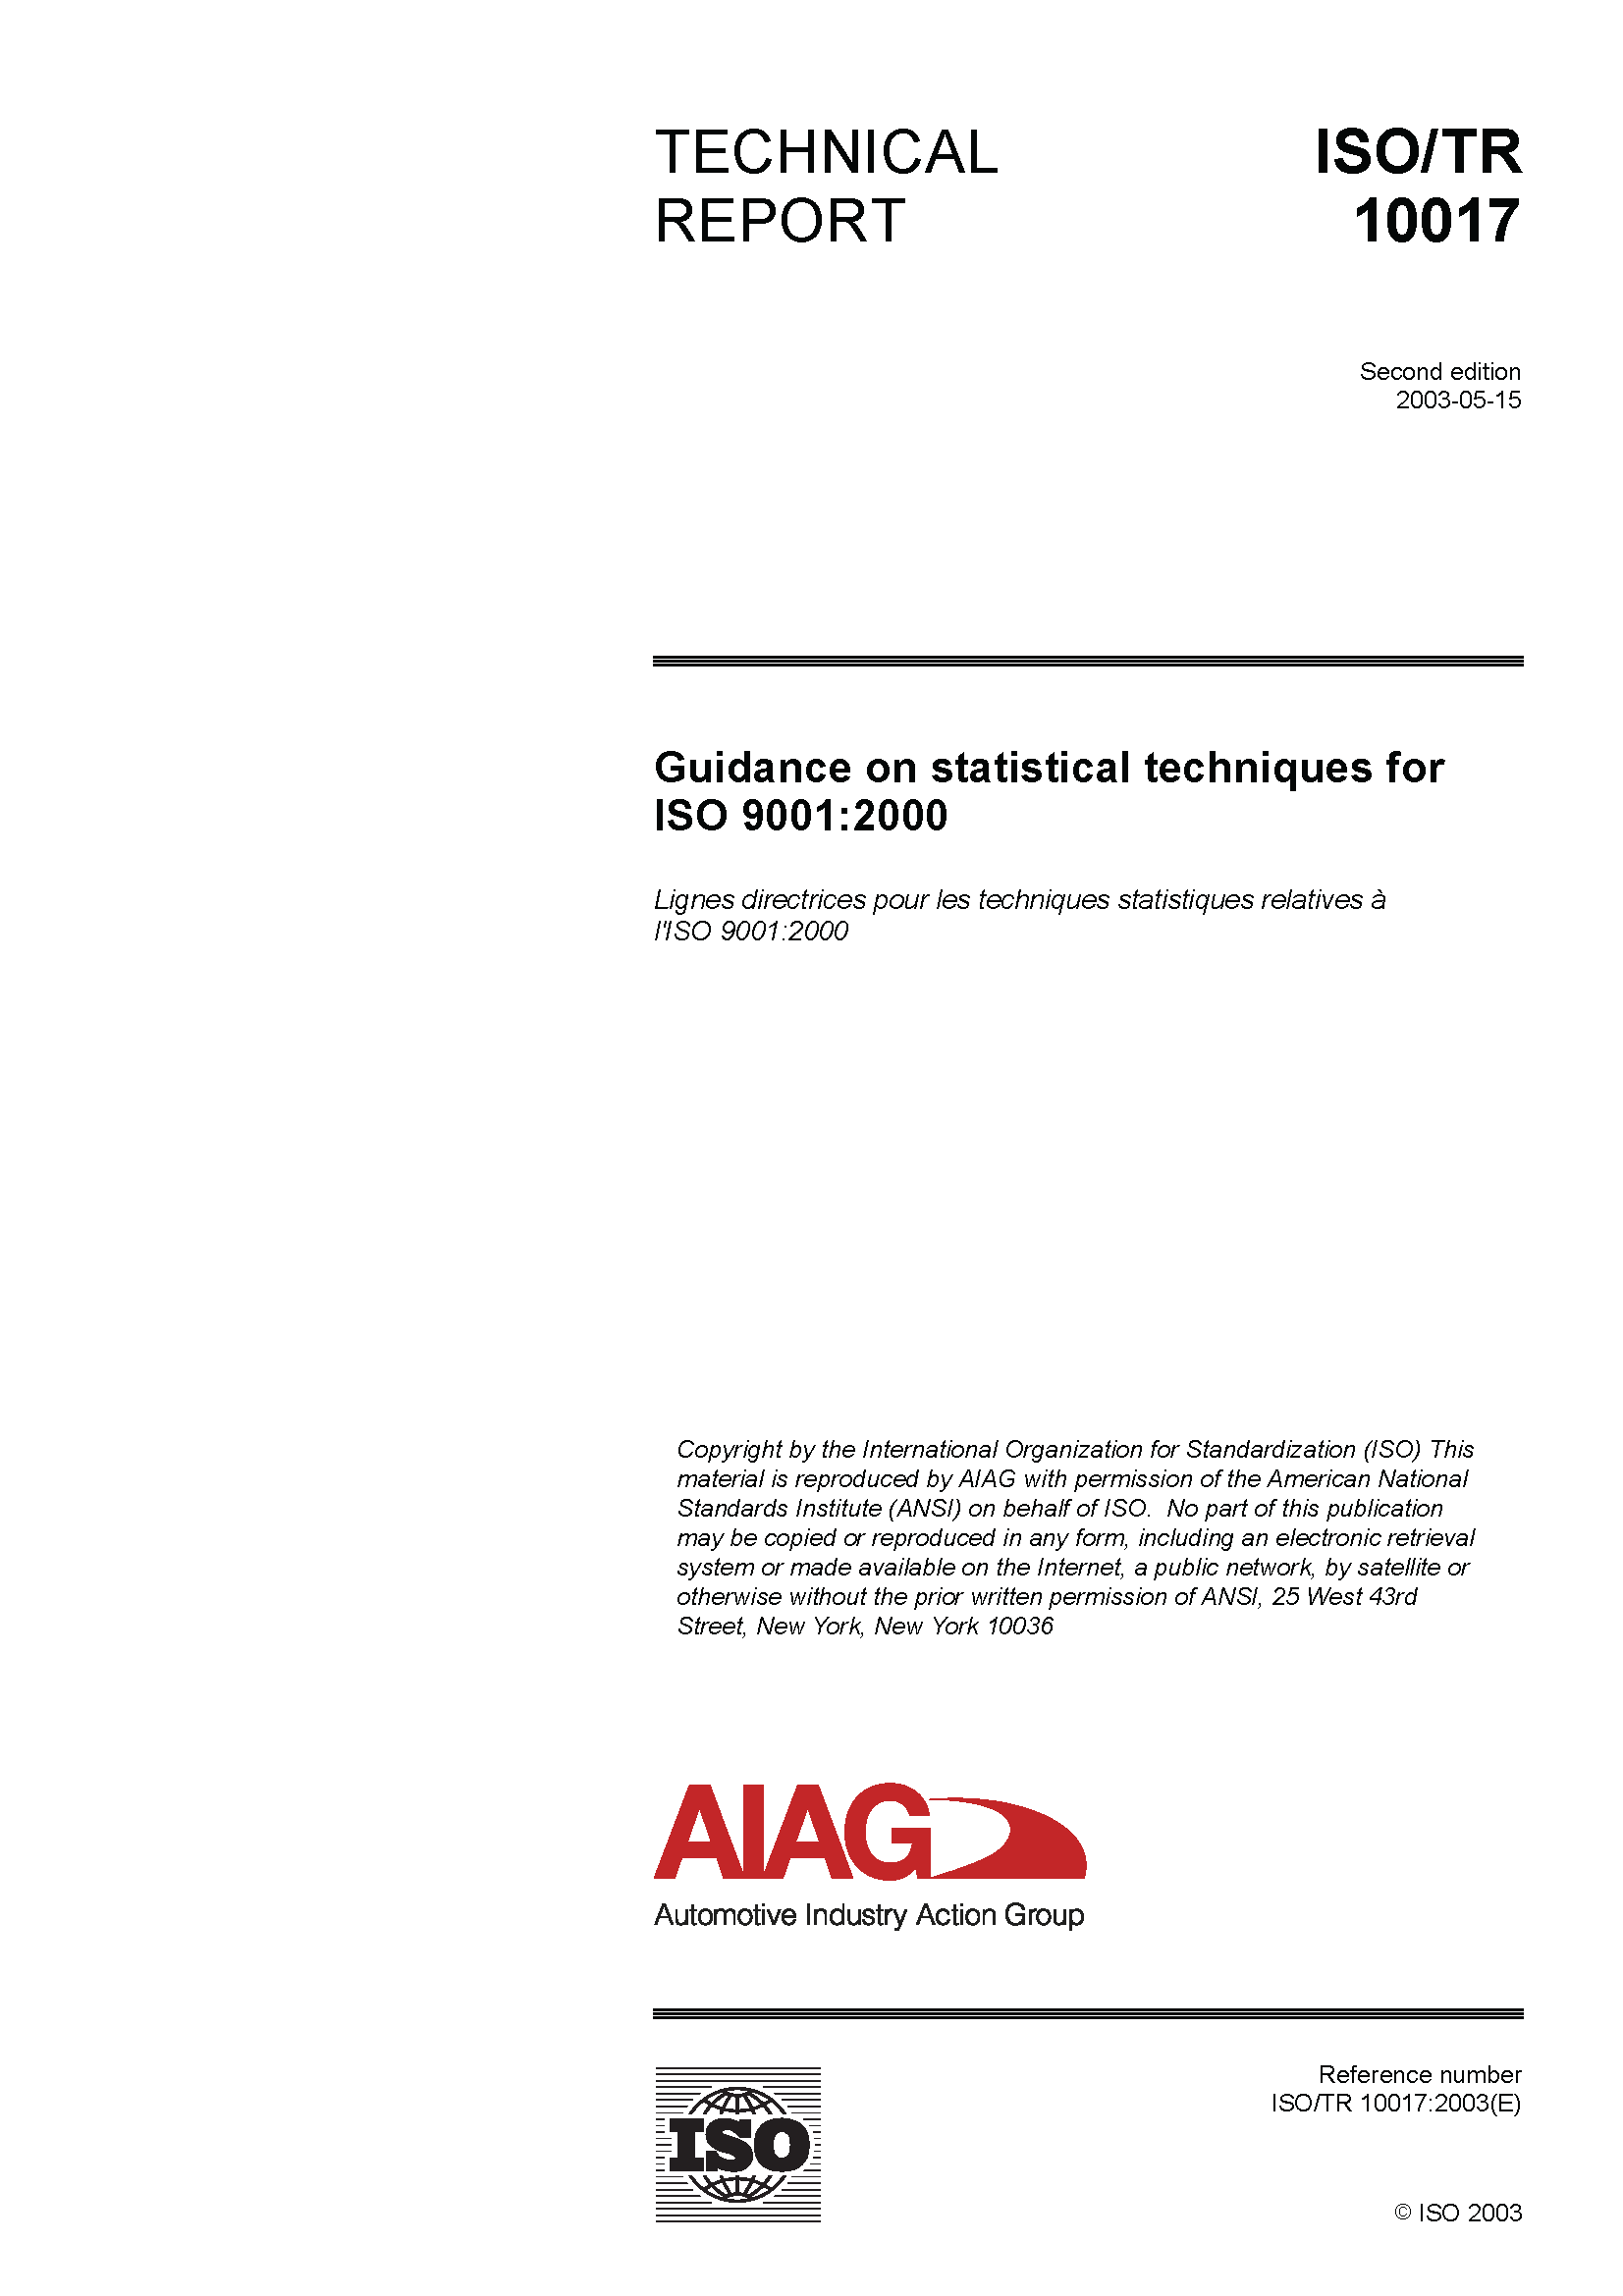 Preview  Guidance on Statistical Techniques for ISO 9001:2000 1.5.2003